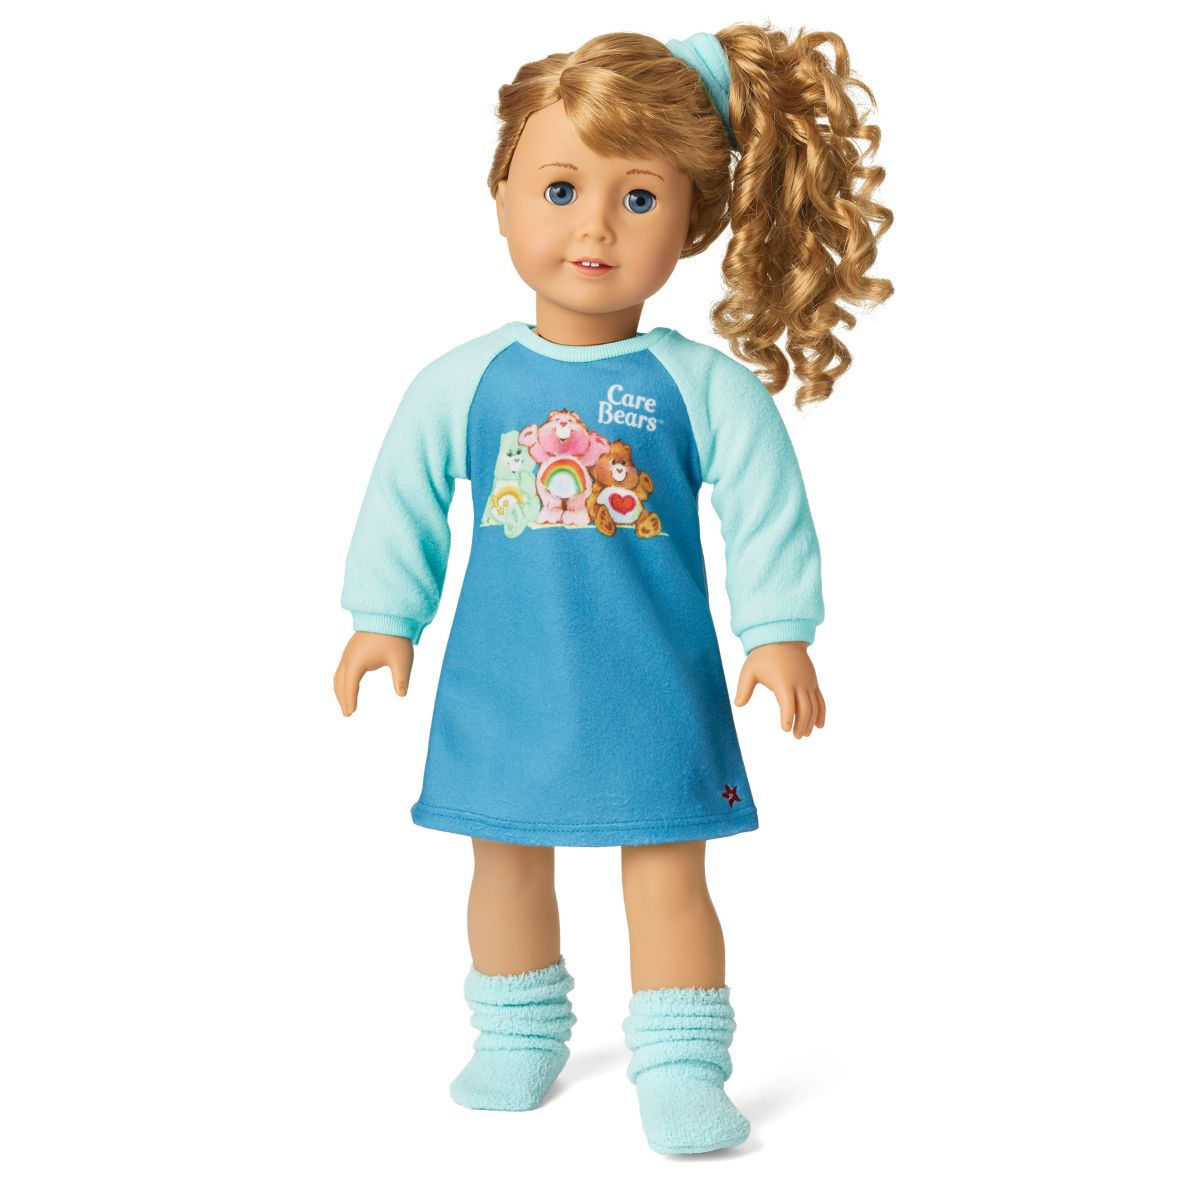 https://hips.hearstapps.com/hmg-prod/images/american-girl-doll-courtney-care-bears-1600199002.png